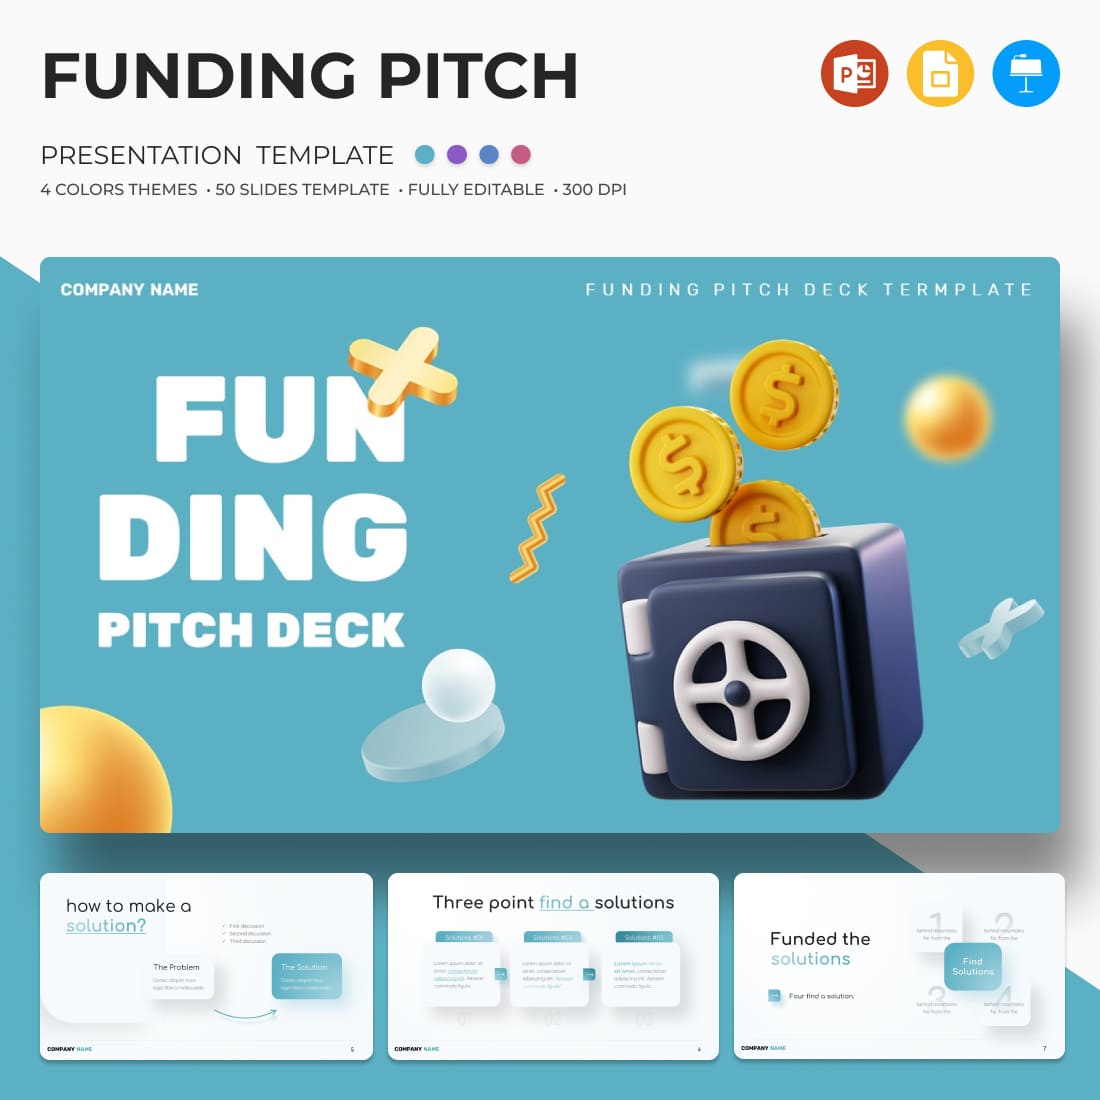 Funding Pitch Deck Presentation Template.